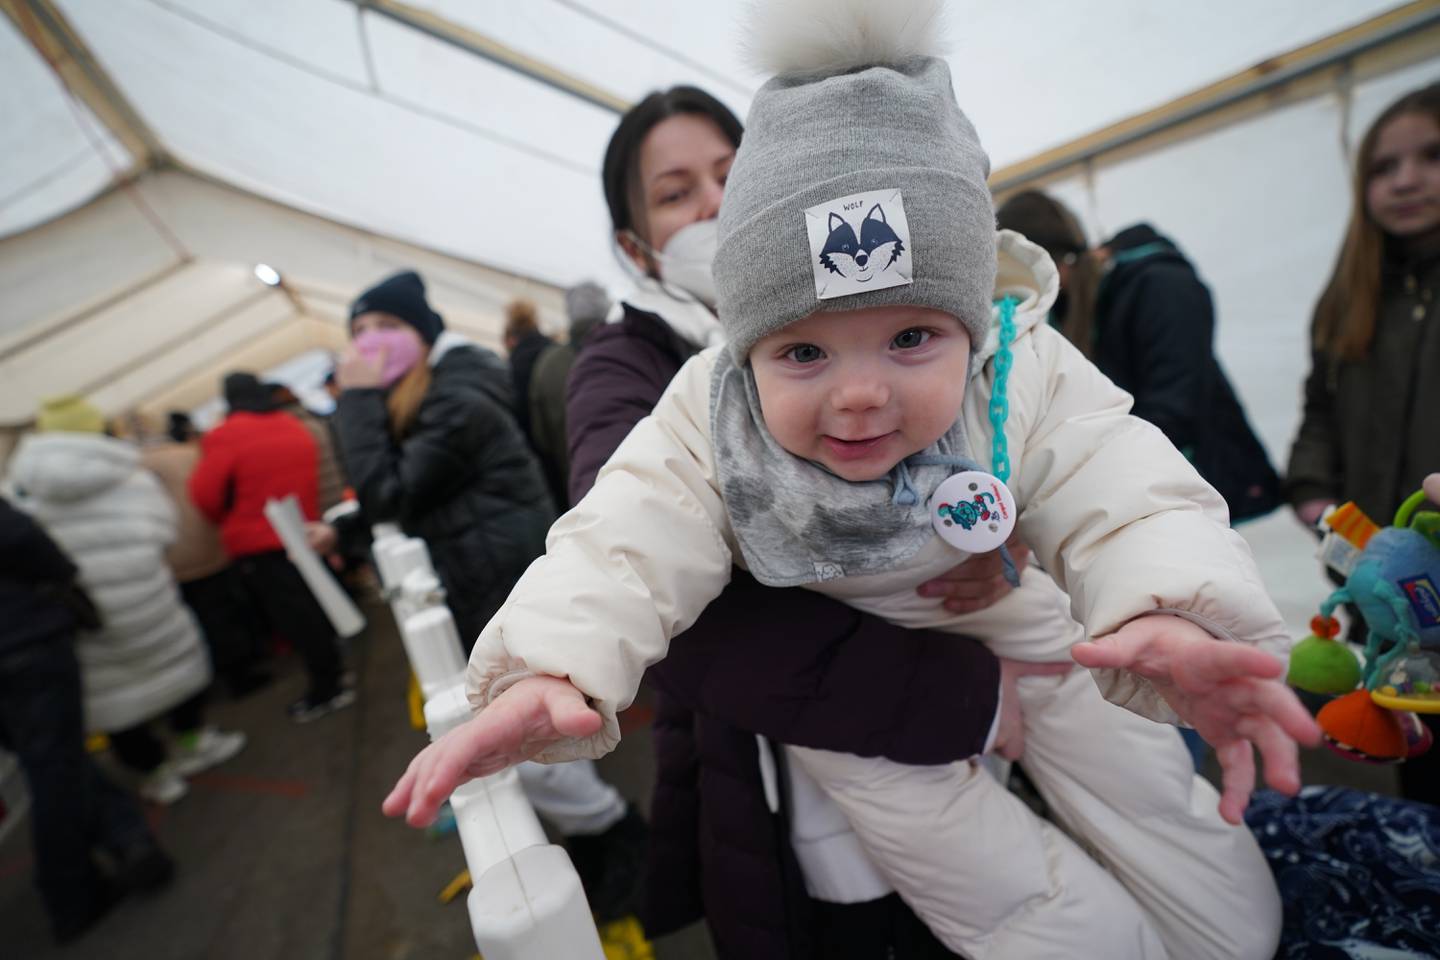 Liliia from Ternopil in Ukraine carries her eight-month-old son Paul in her arms as she waits at the registration office for refugees inn Hamburg, Germany, Monday, March 14, 2022. Germany's Interior Ministry said Monday that it has so far registered 146,998 refugees from Ukraine coming to the country, but the real number may differ if people didn't register or moved on to another country. (Marcus Brandt/dpa via AP)